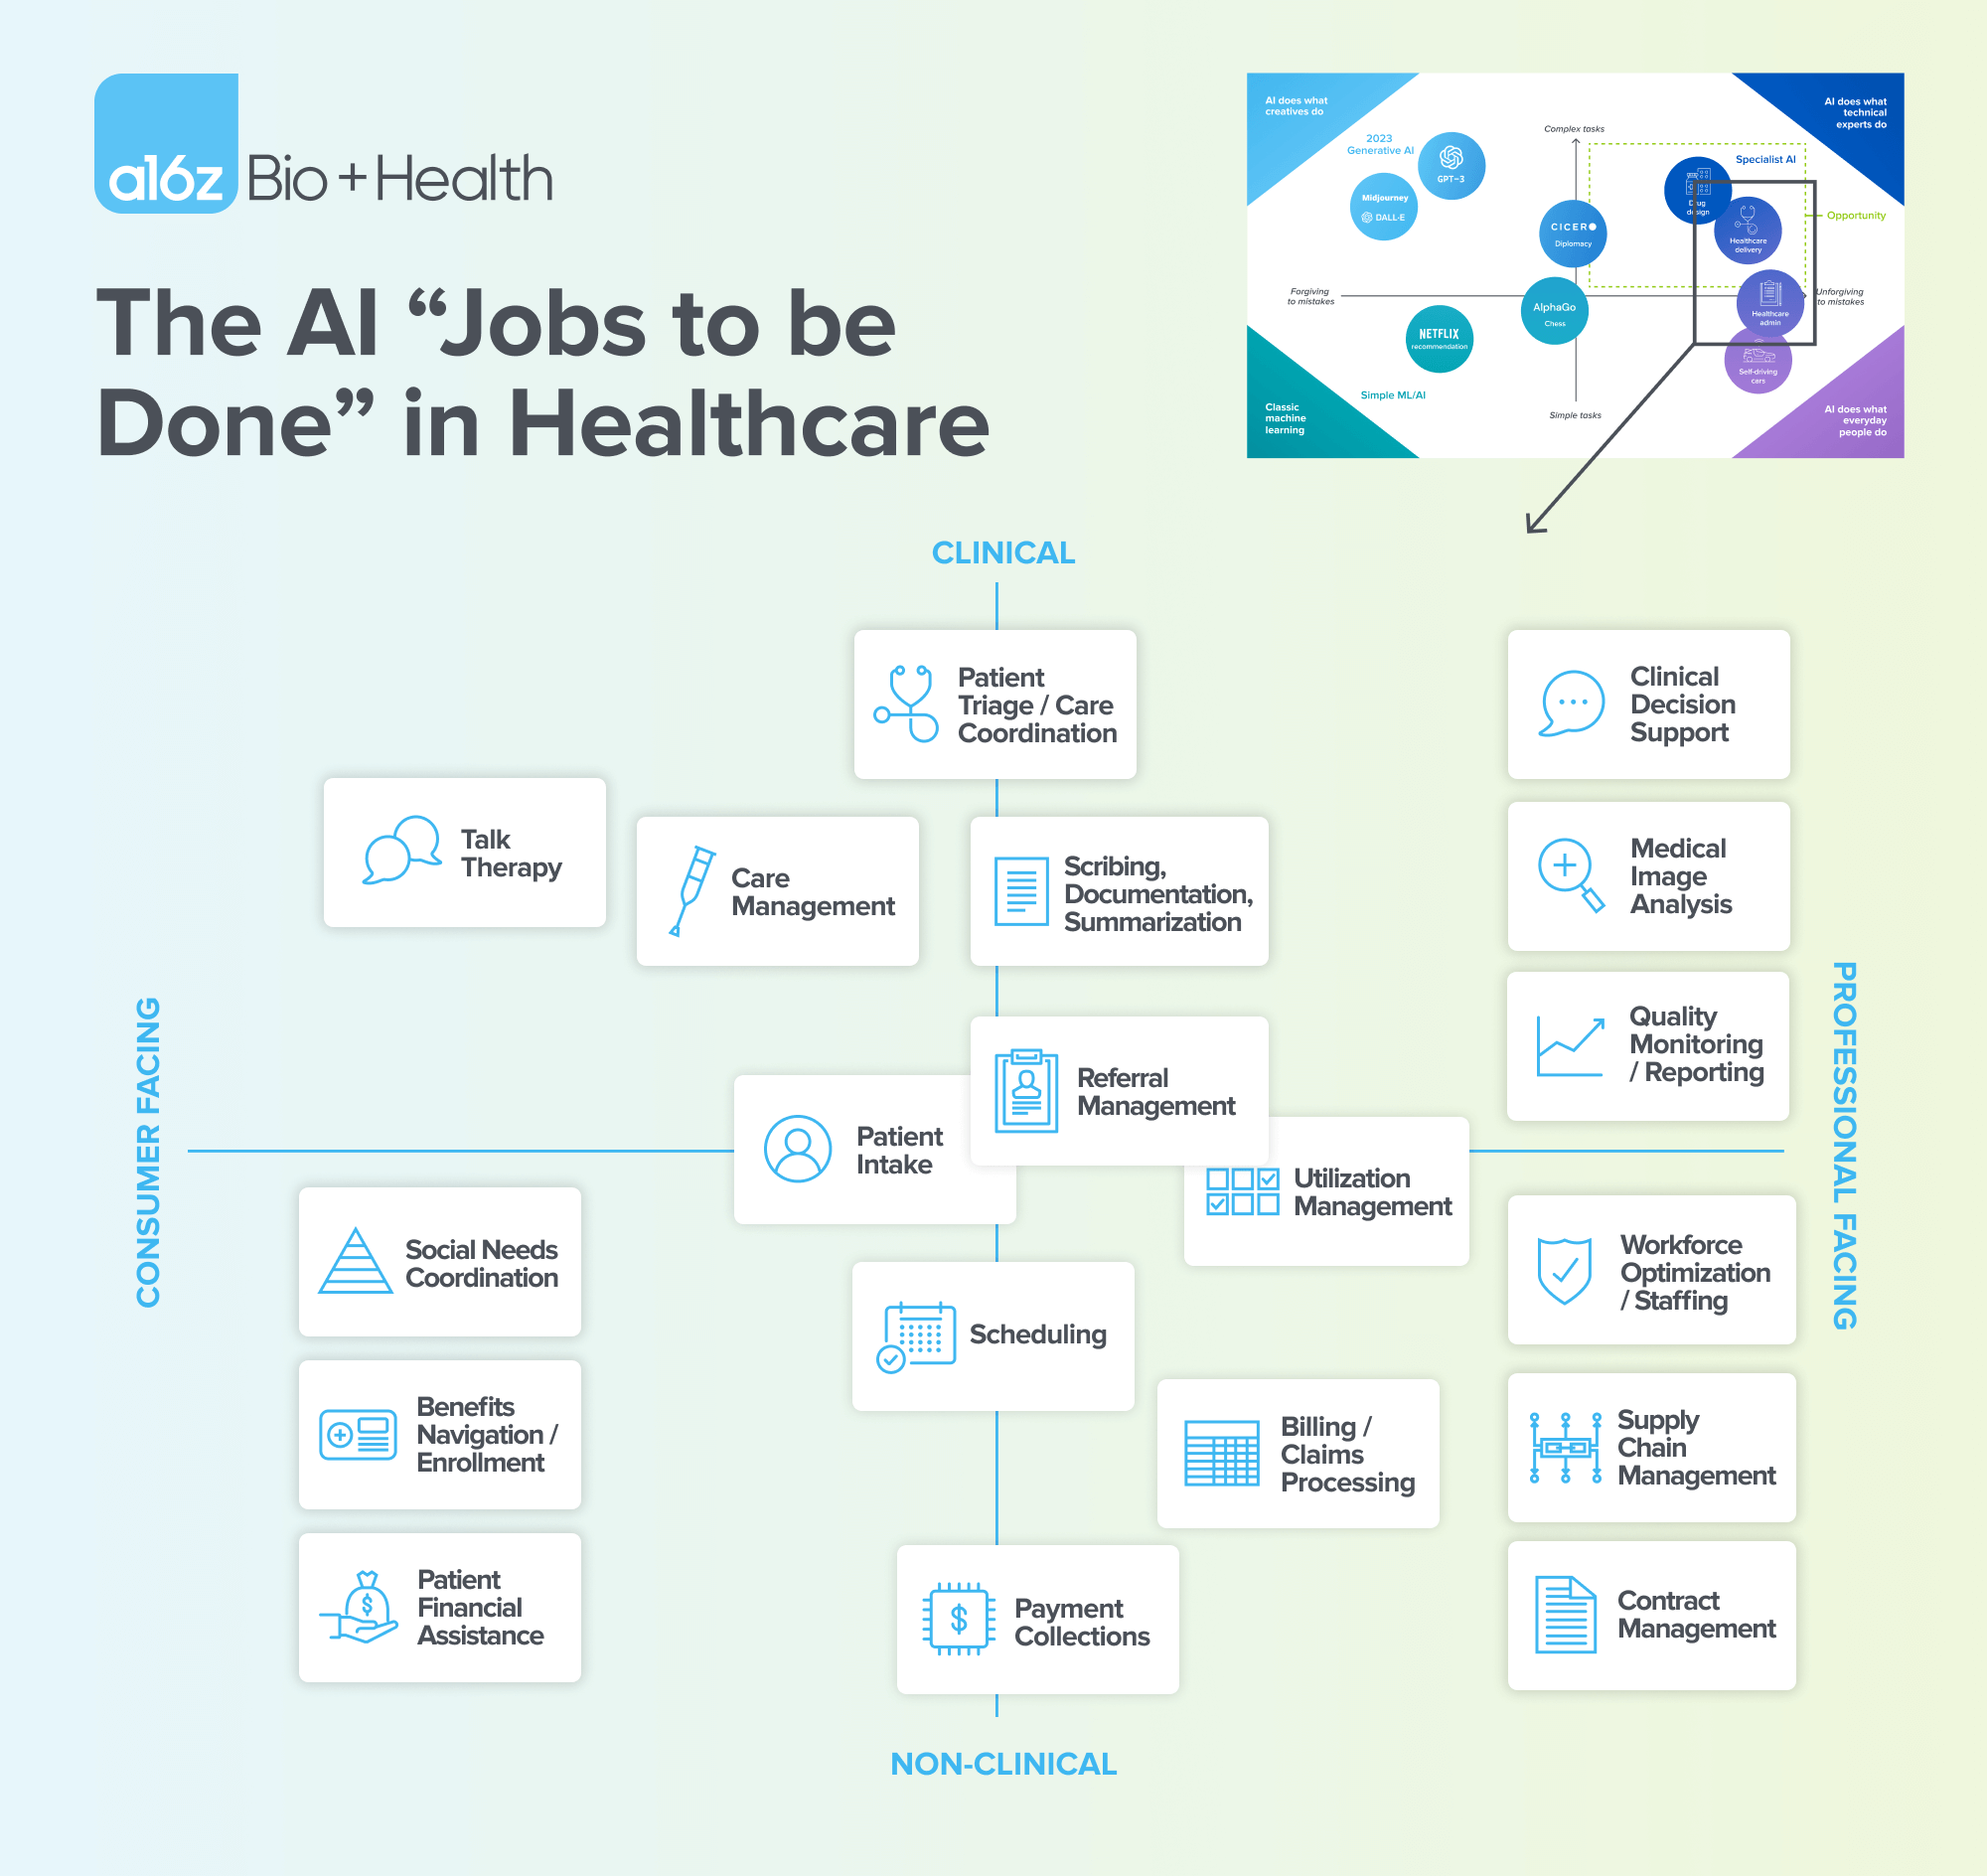 Graphic showing possible jobs to be done by AI in healthcare along two axes. The horizontal axis ranges from consumer facing to professional facing, and the vertical axis ranges from clinical to non-clinical.